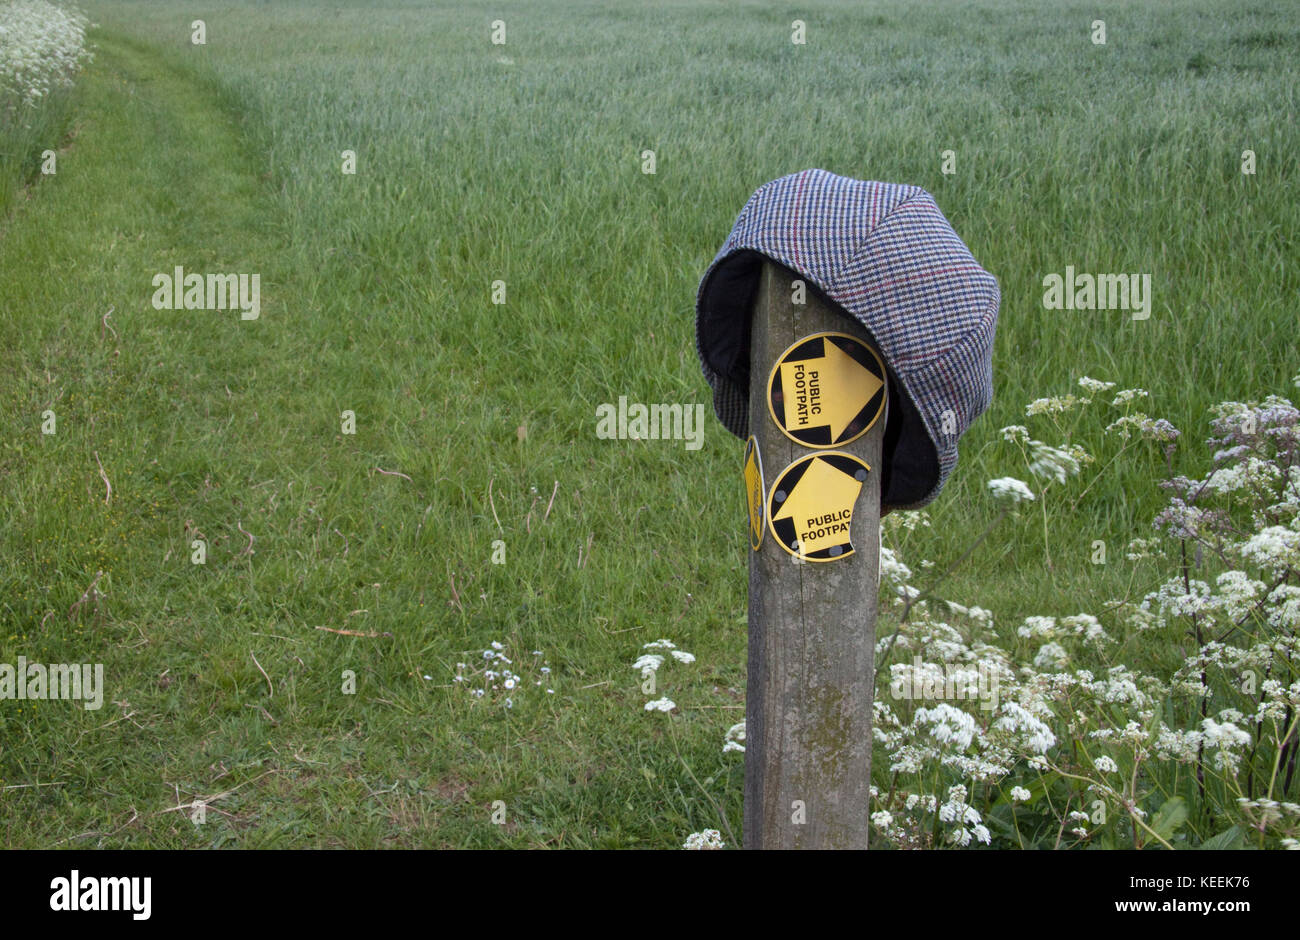 A lost flat cap on a post indicating footpaths Stock Photo